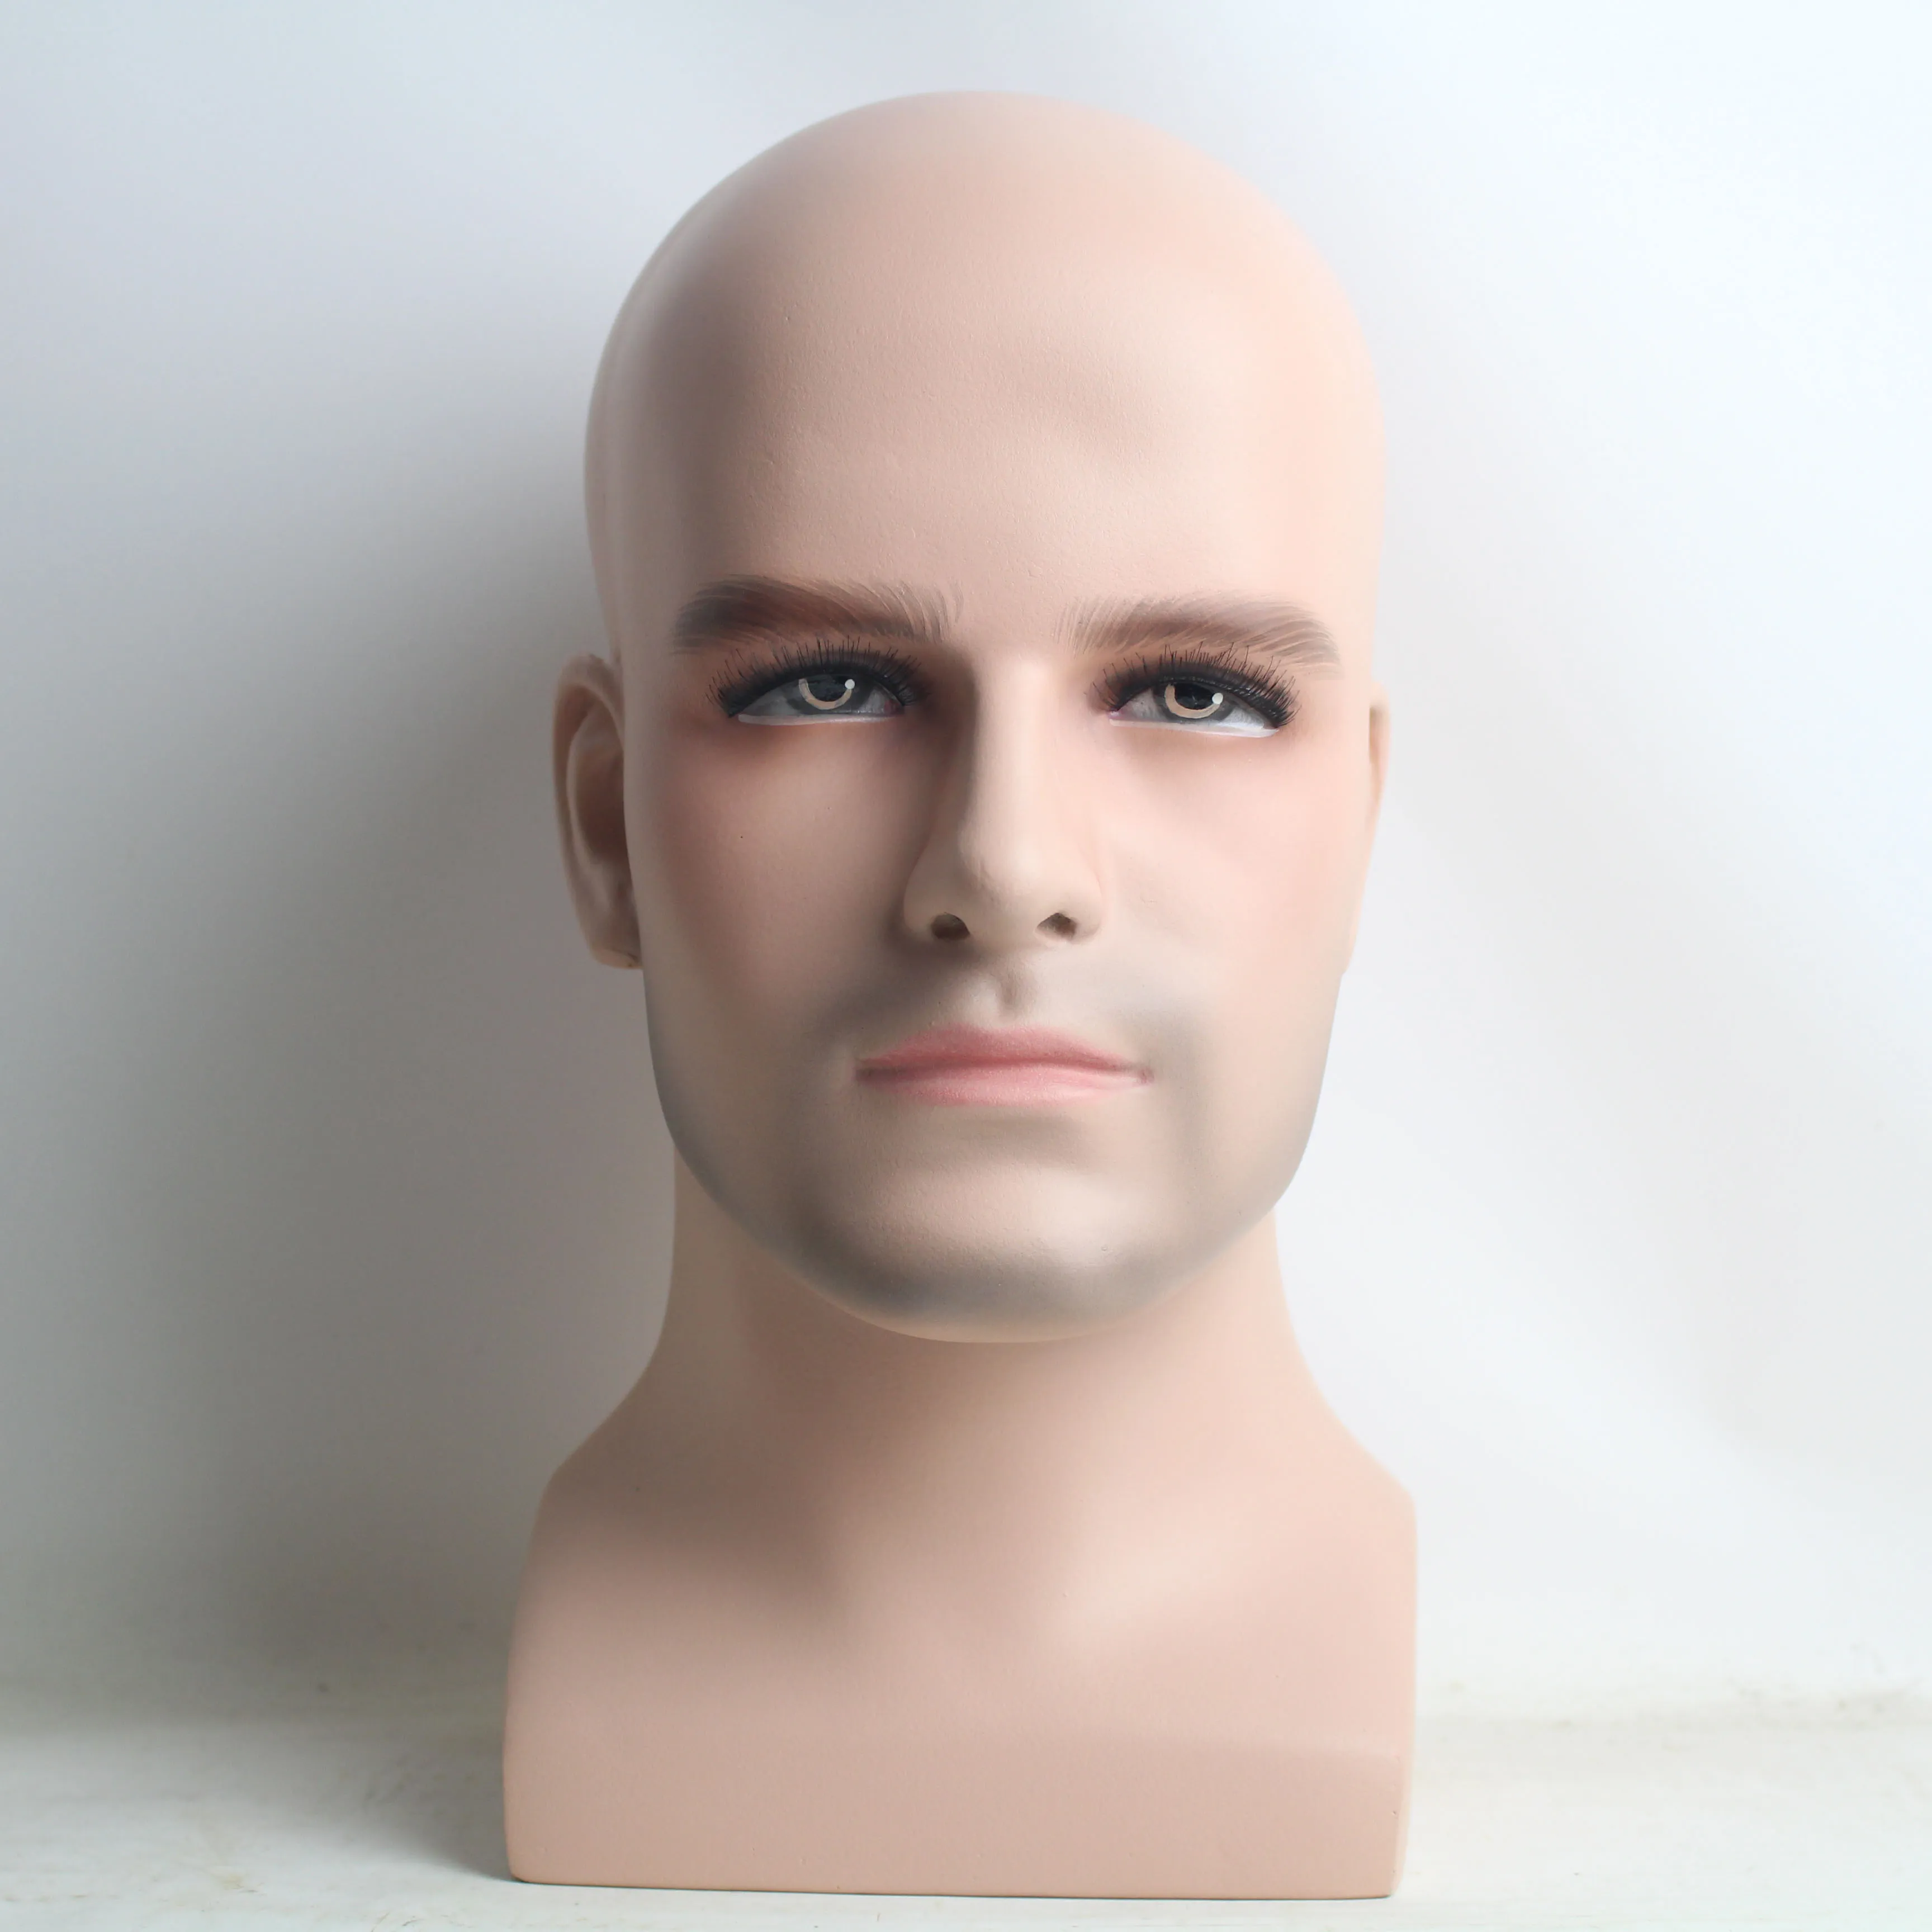 Buy Male Mannequin Head  Display Mannequin Head With Makeup